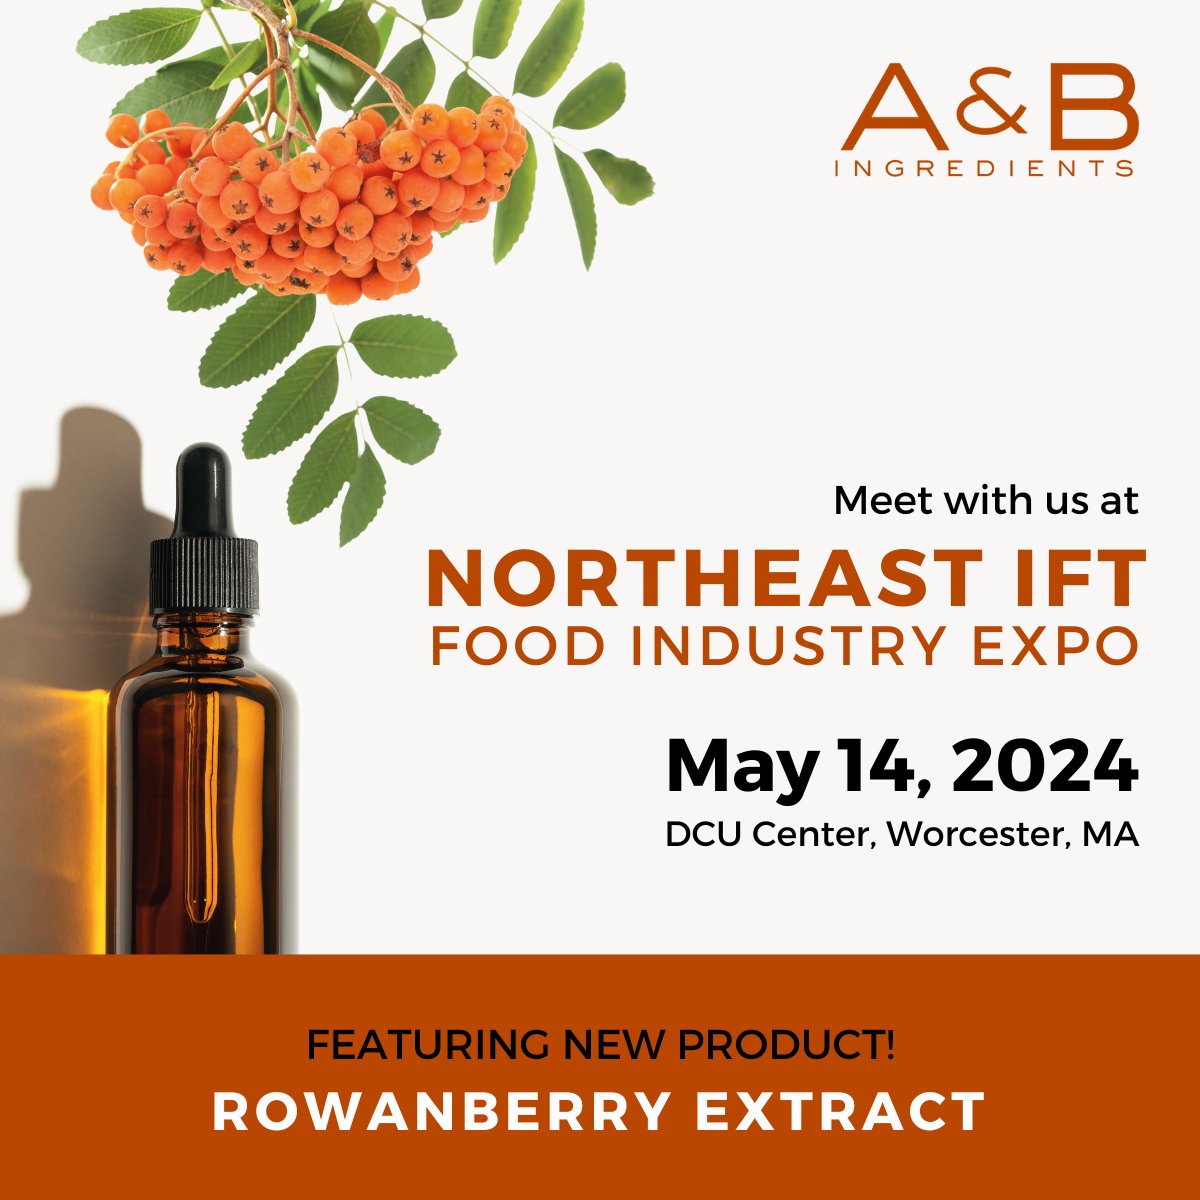 We are excited to attend the Northeast Section #IFT Food Industry Expo on May 14th in Worcester, MA!
🍀 Showcasing our latest ingredient innovations:
* #Rowanberry Extract - For Natural Yeast & Mold Control
* High-Performance #CleanLabel Starches

#NEIFT